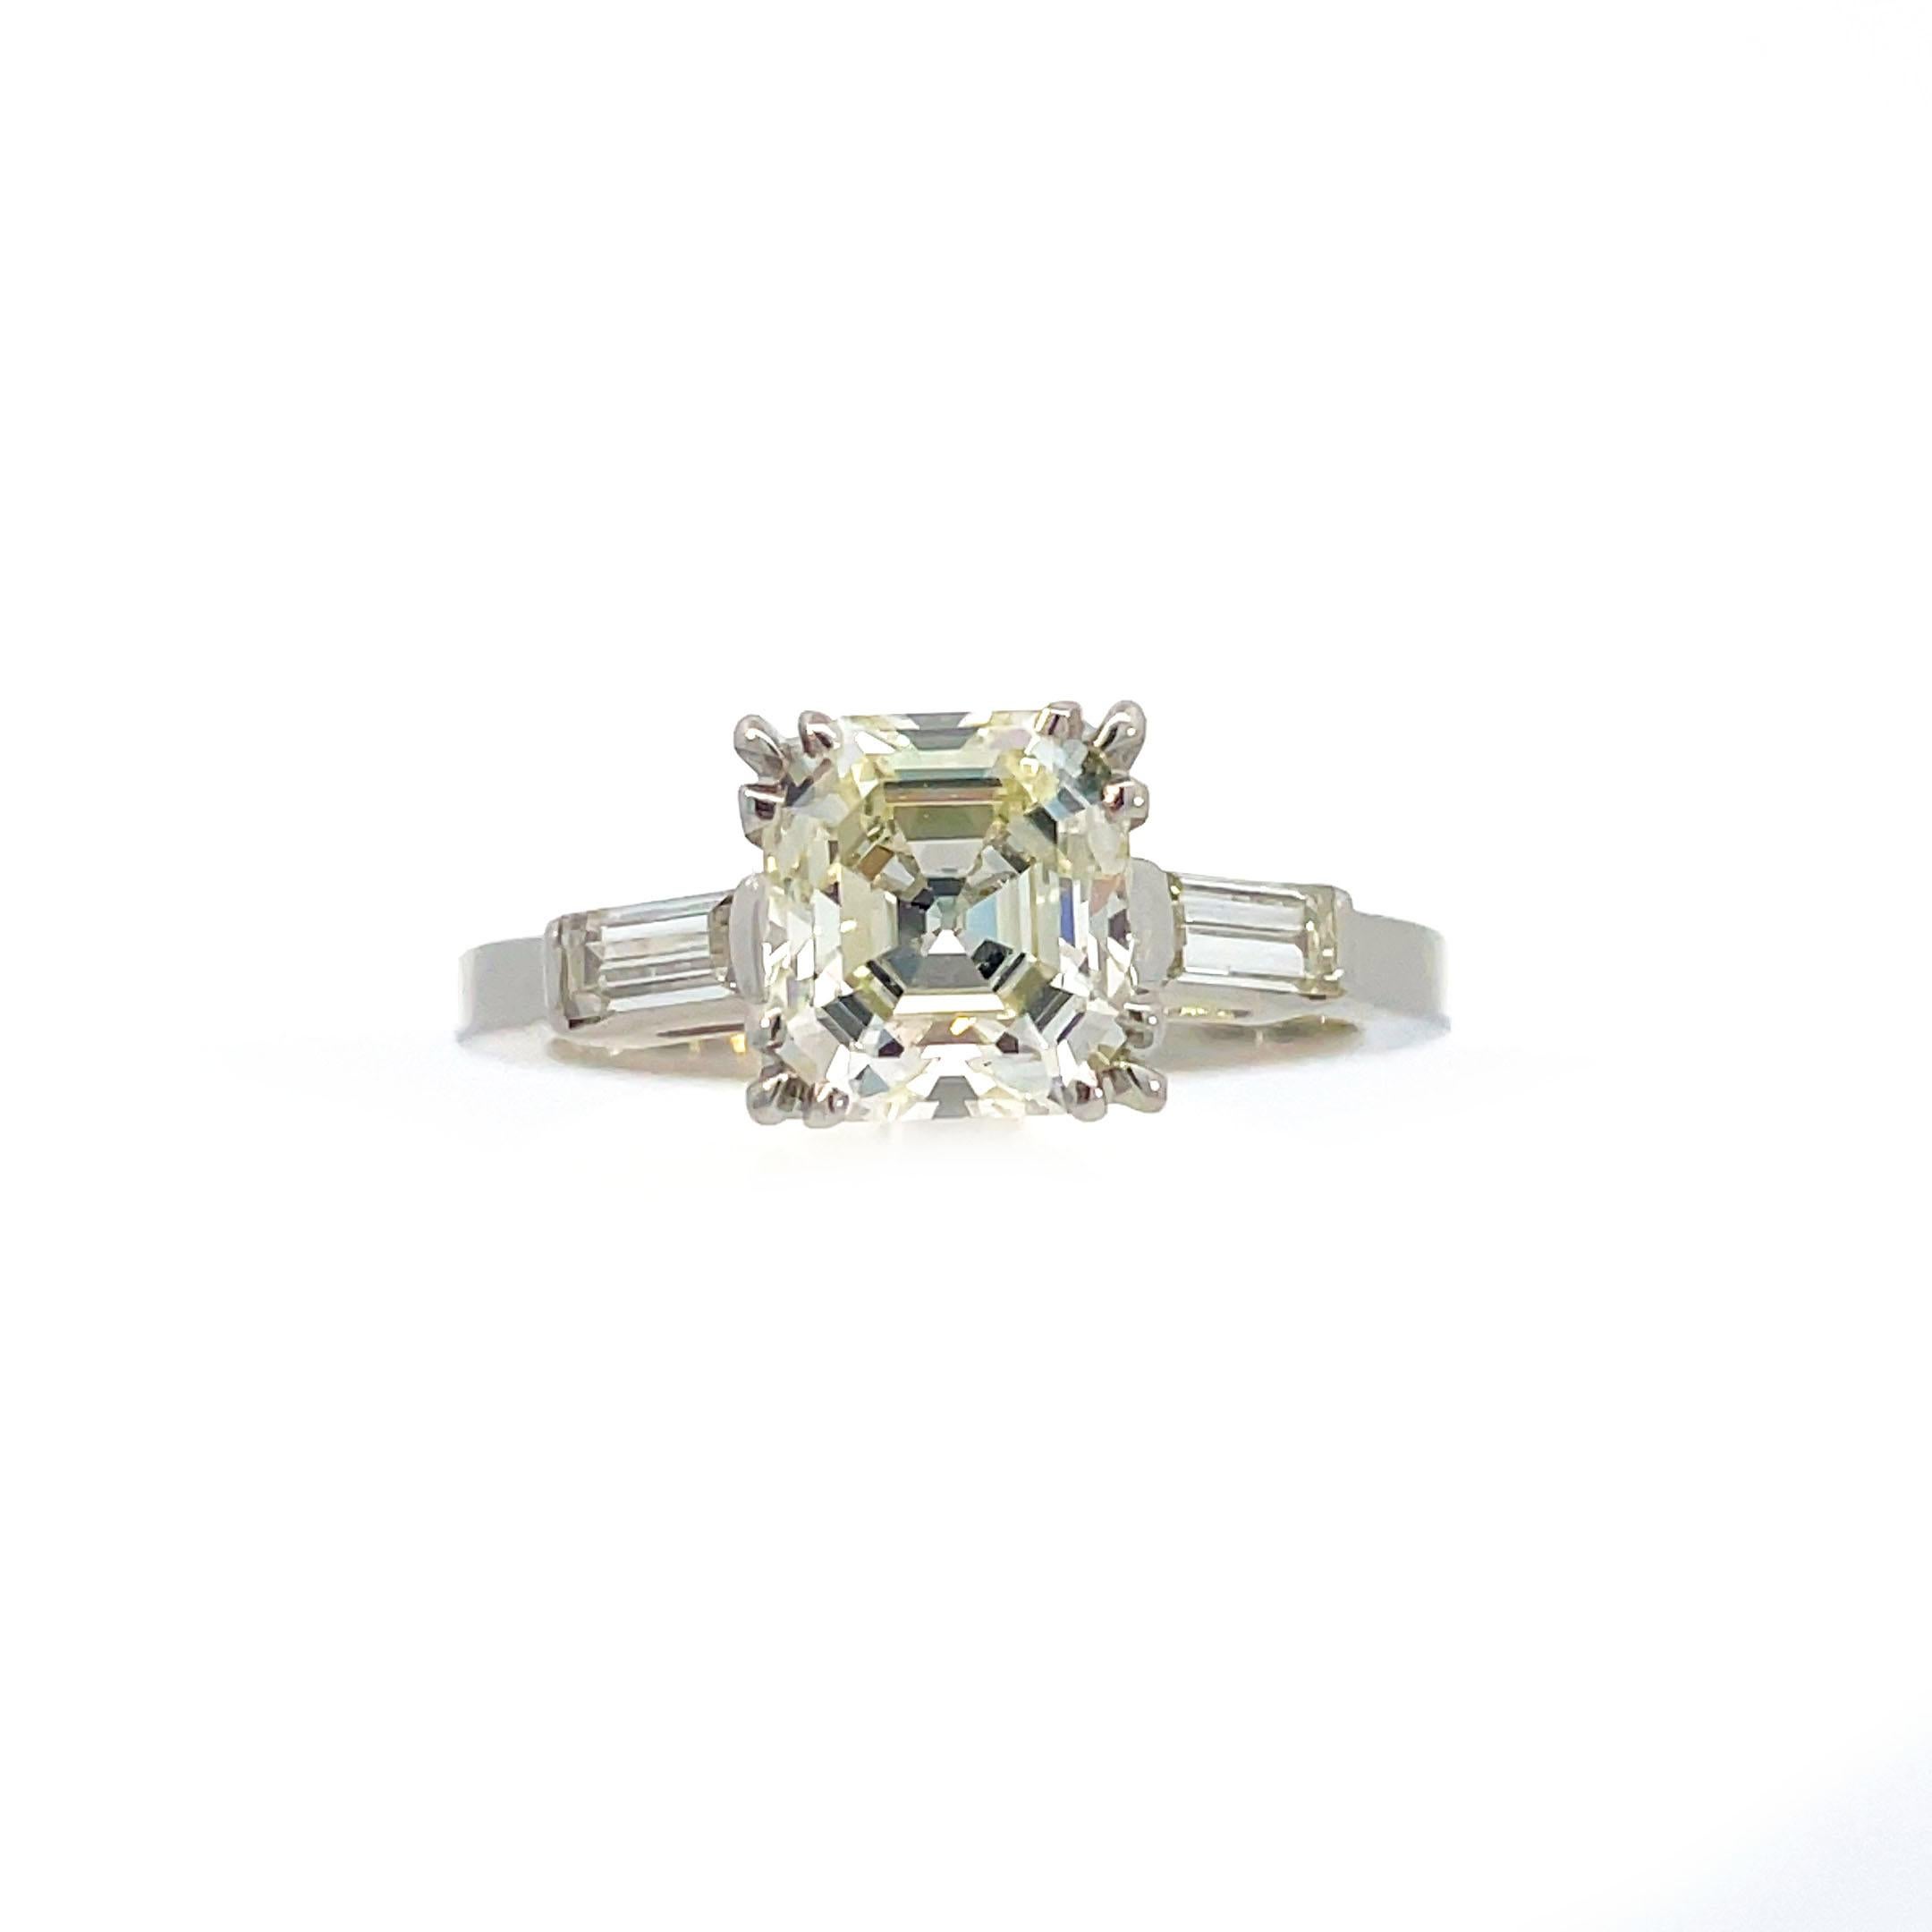 1925 Art Deco Platinum Asscher and Baguette Diamond Ring with GIA Report For Sale 2